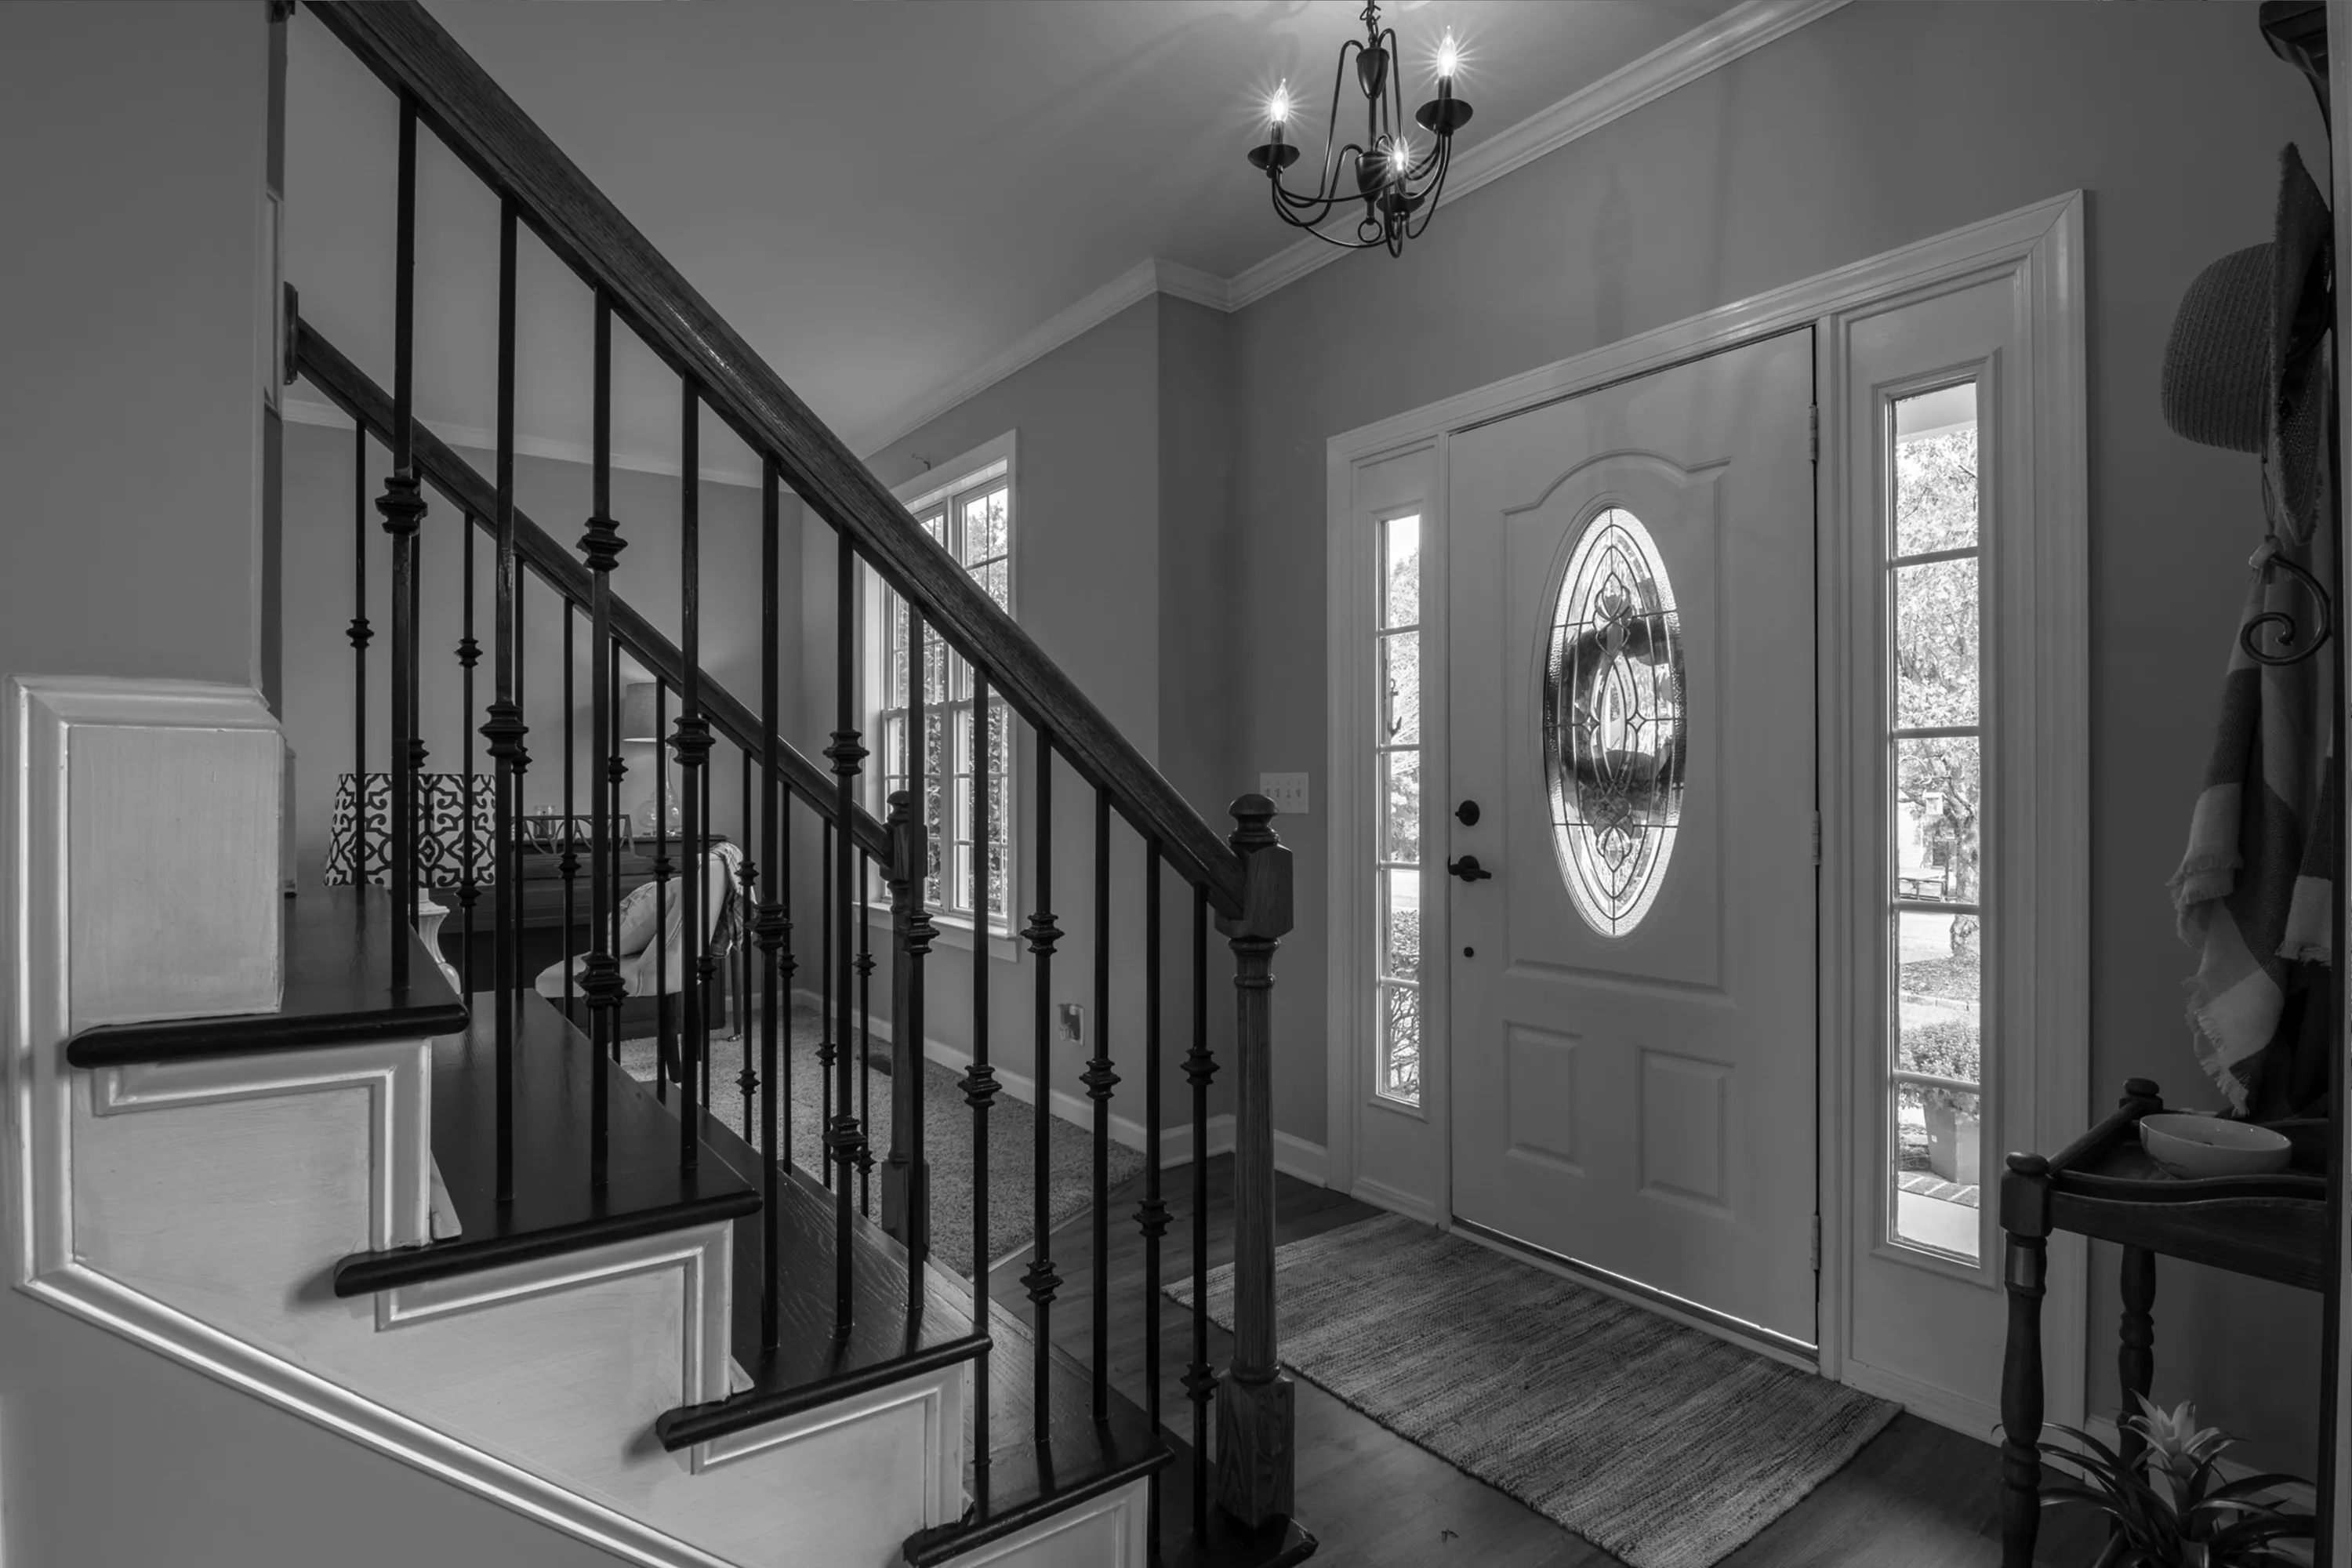 Image of home entrance displaying excellent real estate photography skills